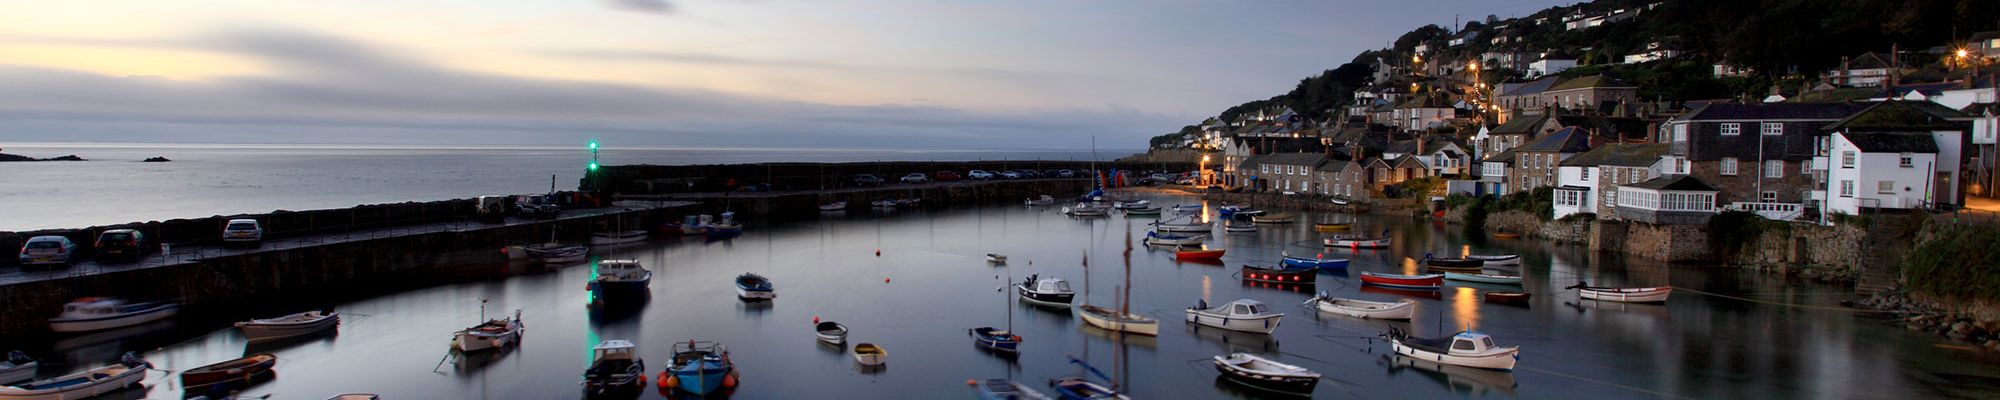 Contact Us in Mousehole Cornwall